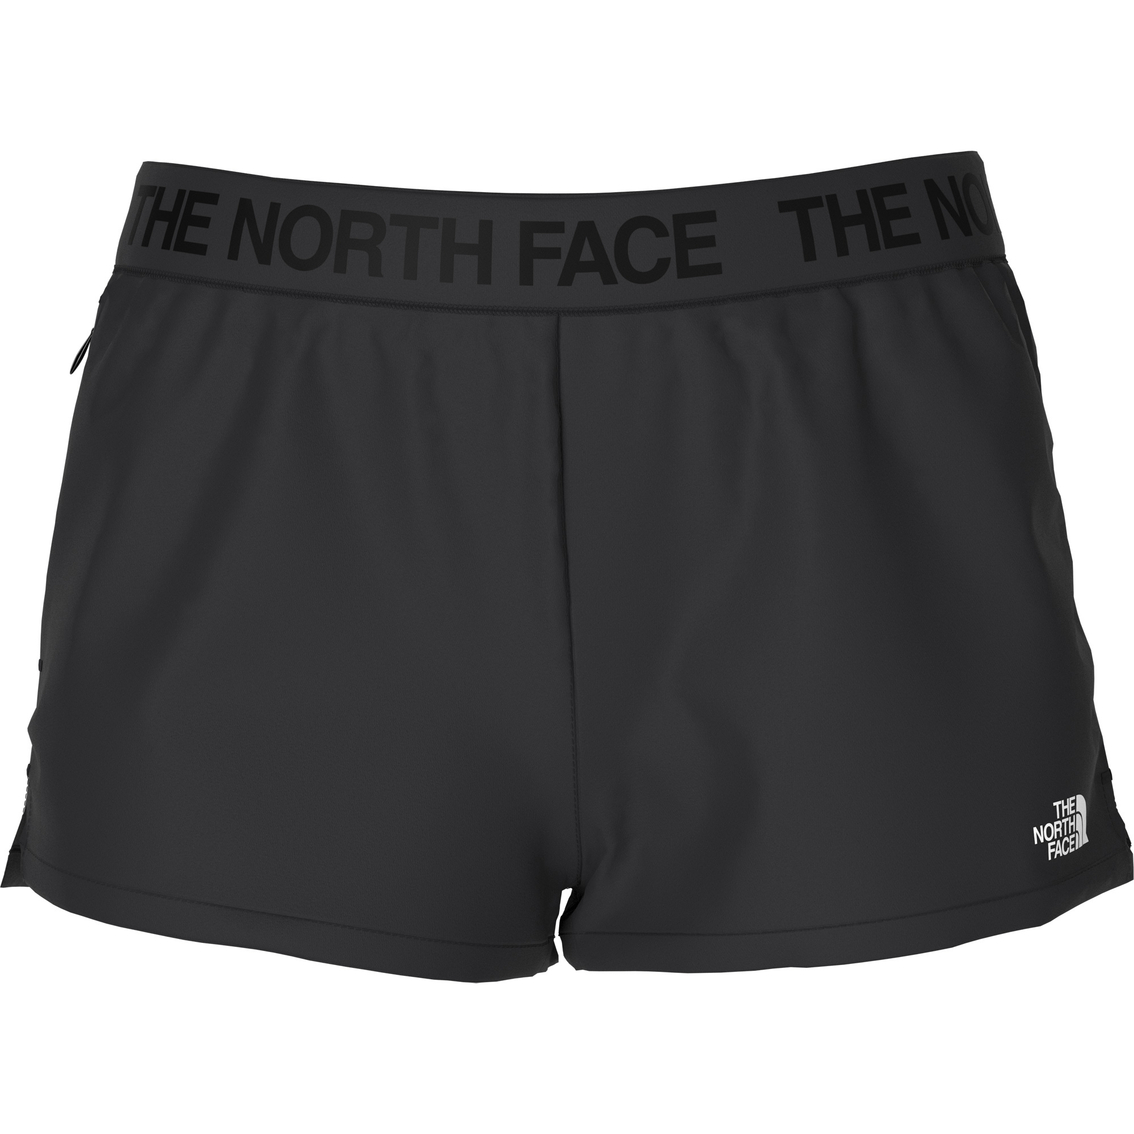 The North Face Women's Wander Short | Shorts | Clothing & Accessories ...